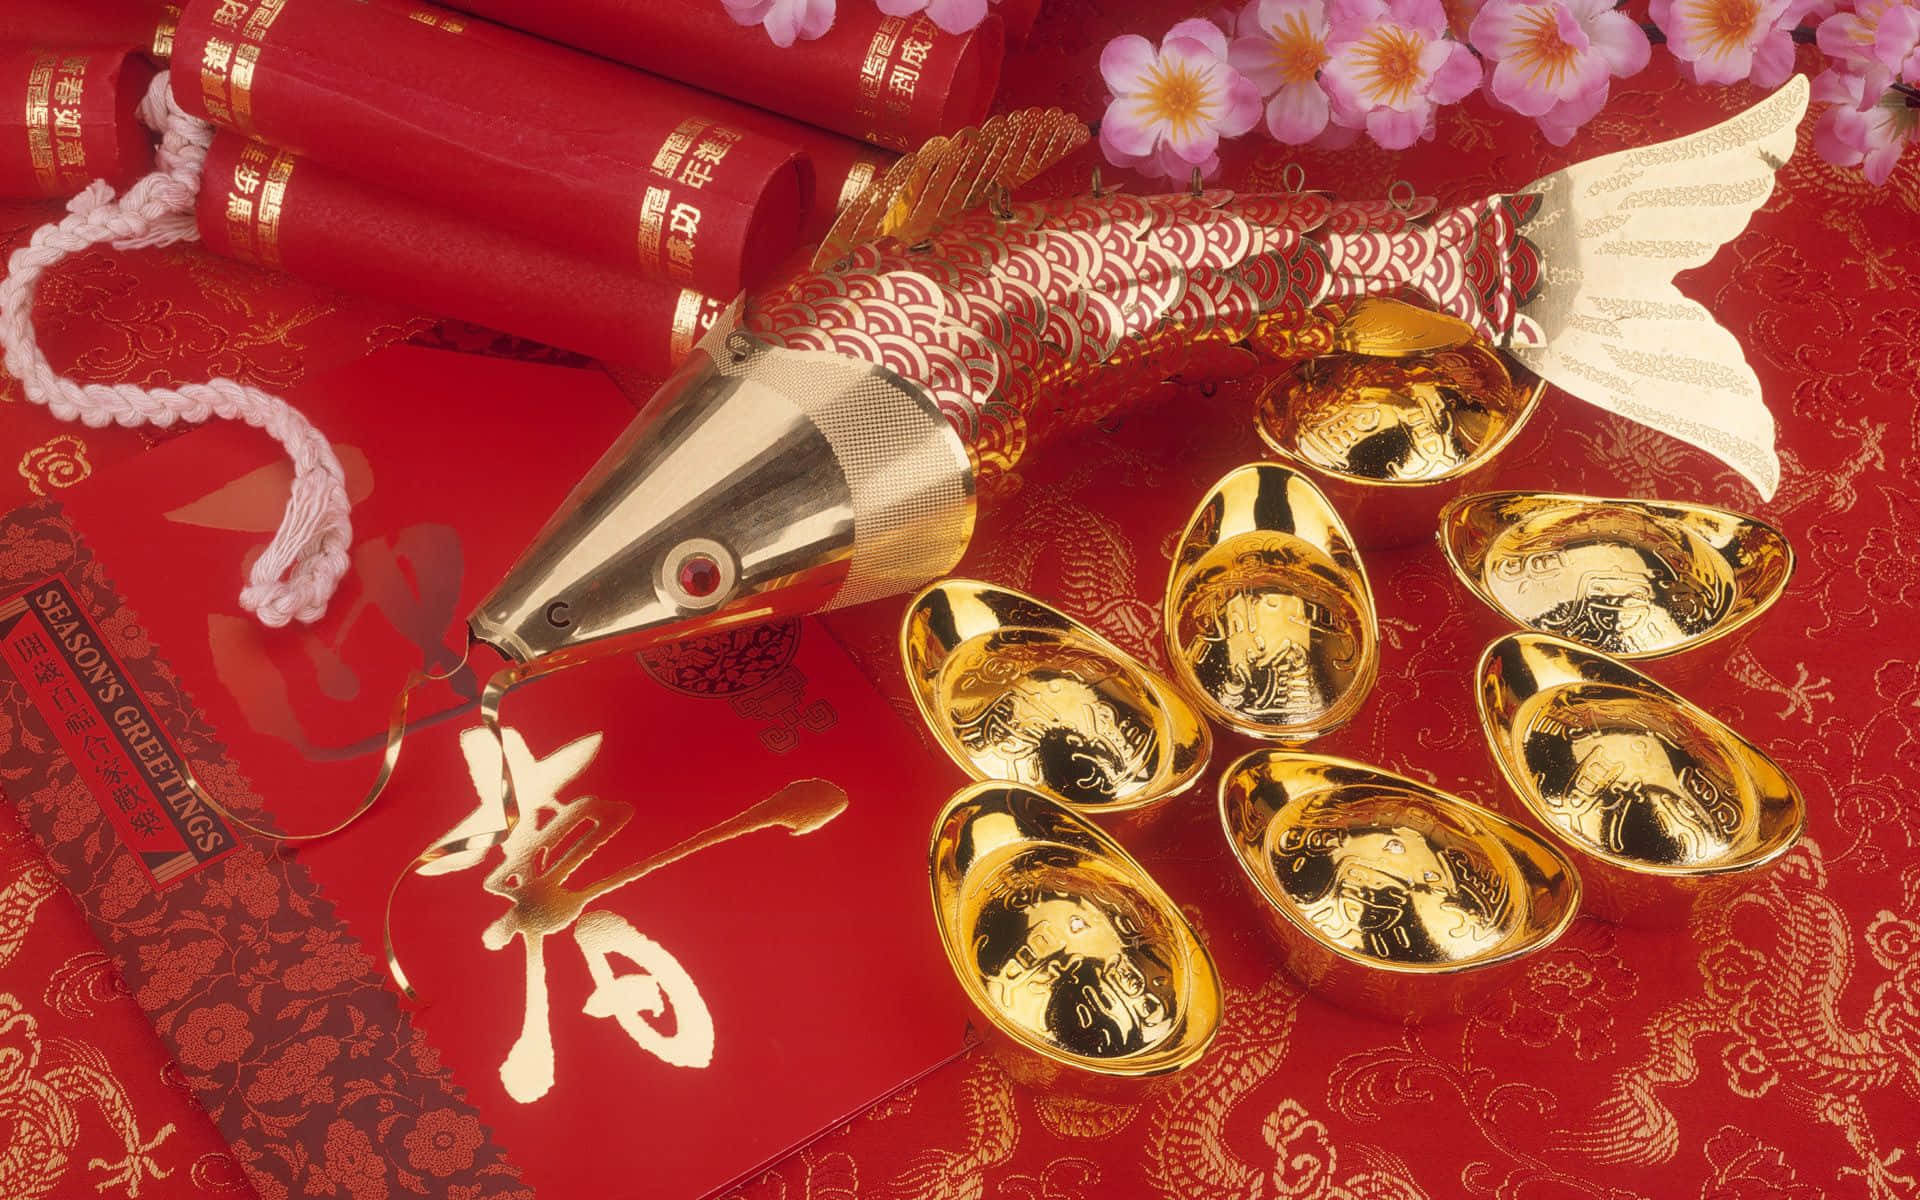 "Celebrate the Year of the Ox with Fun and Prosperity!"